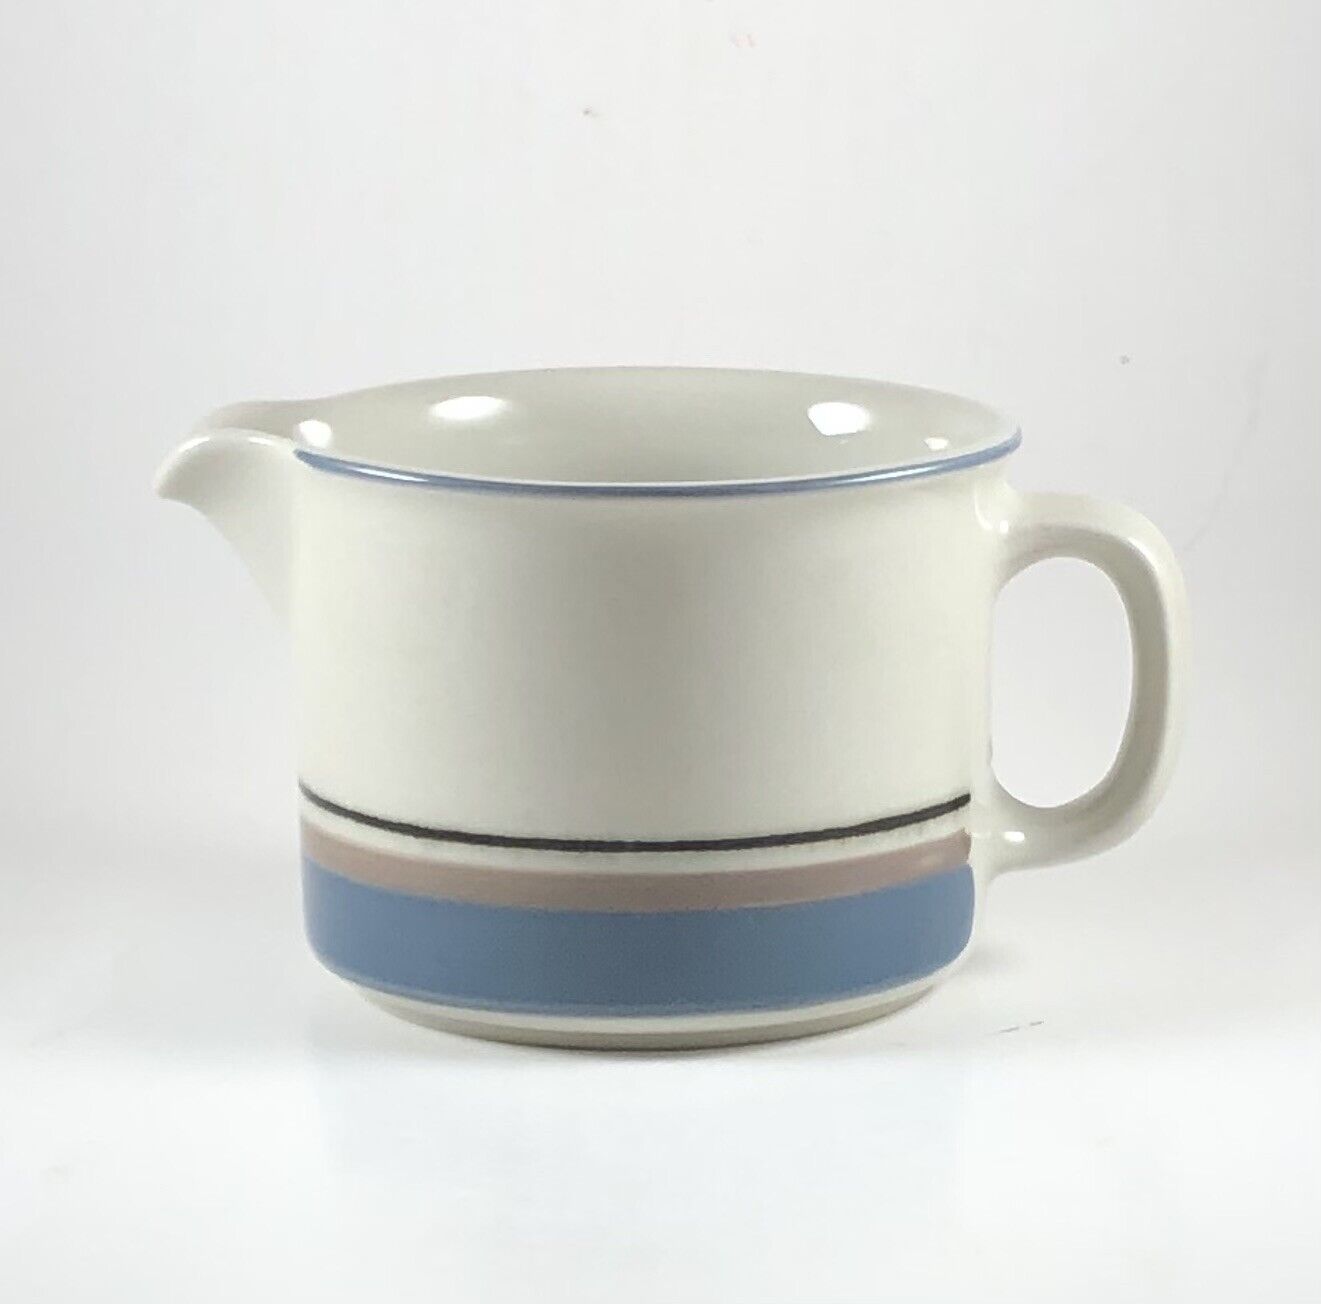 Read more about the article Vintage Arabia Finland Uhtua Creamer Pitcher Jug Inkeri Leivo 1980s.